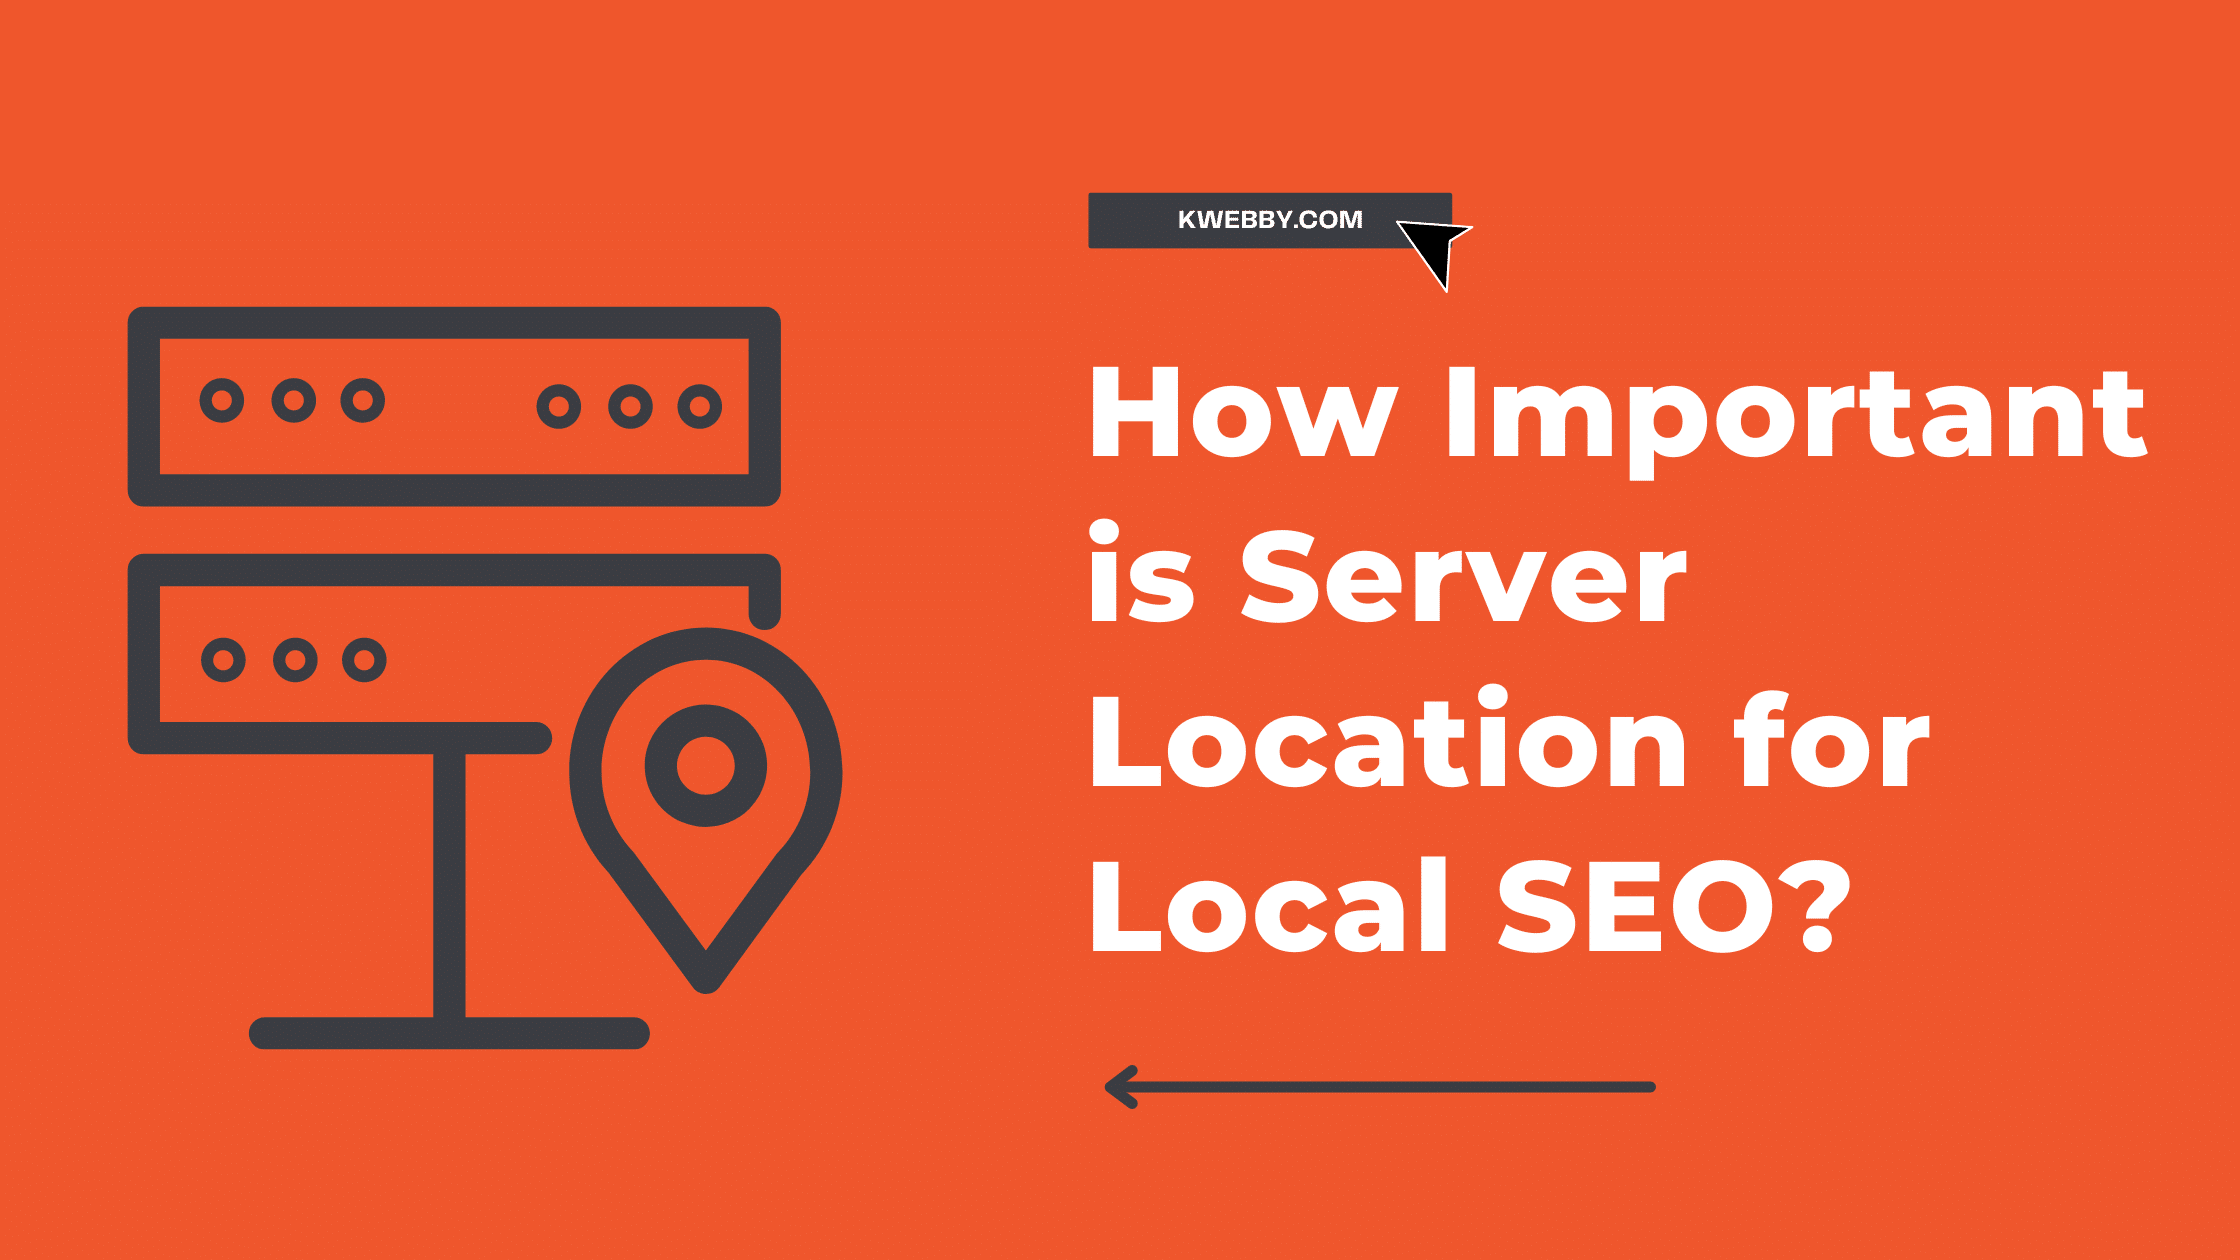 How Important is Server Location for Local SEO? (8 Proven Reasons)